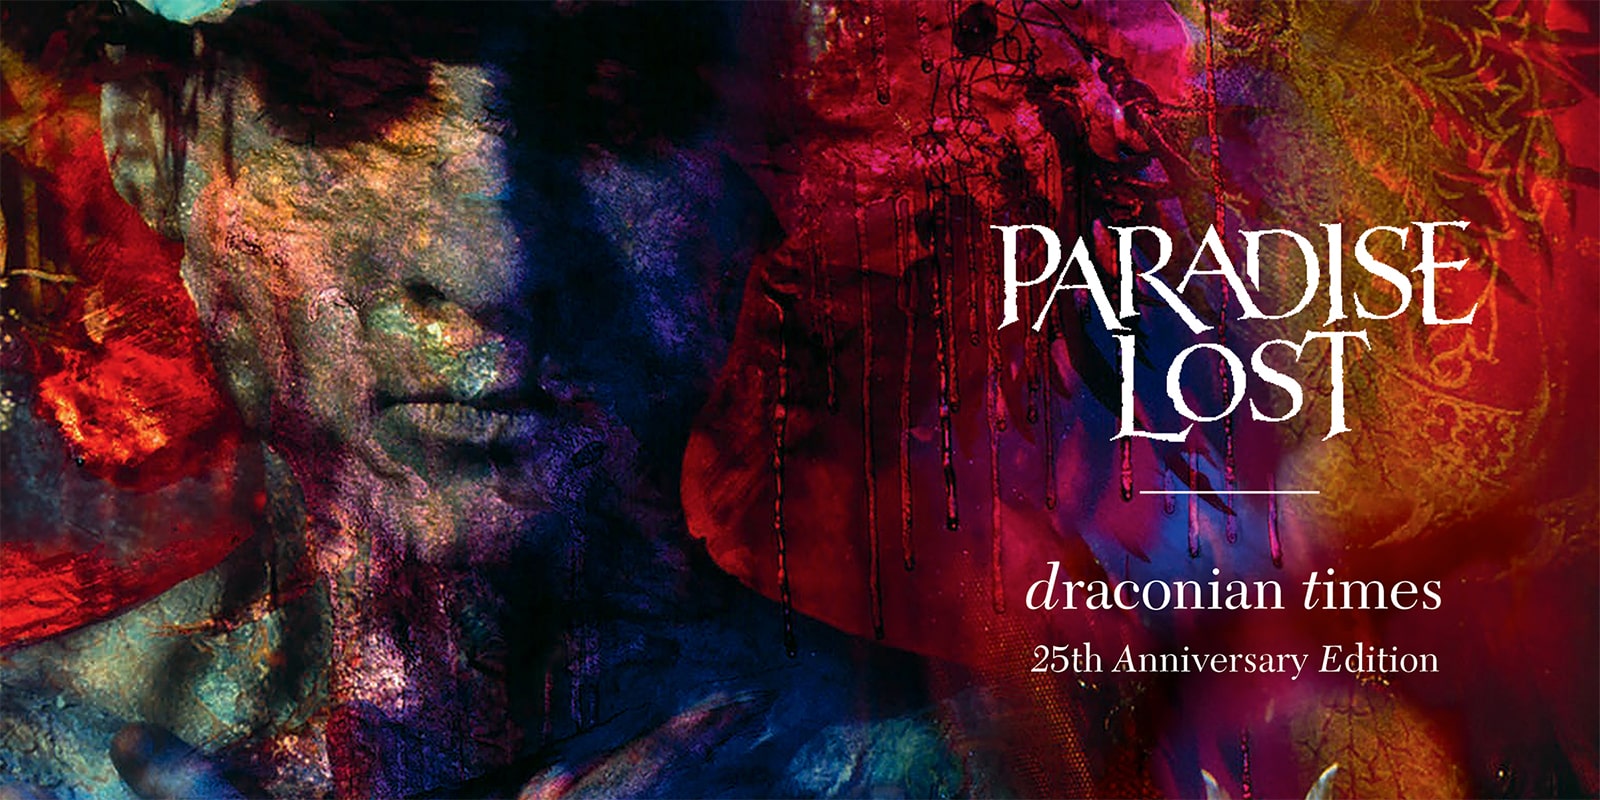 Paradise Lost Draconian Times: 25th Anniversary Edition